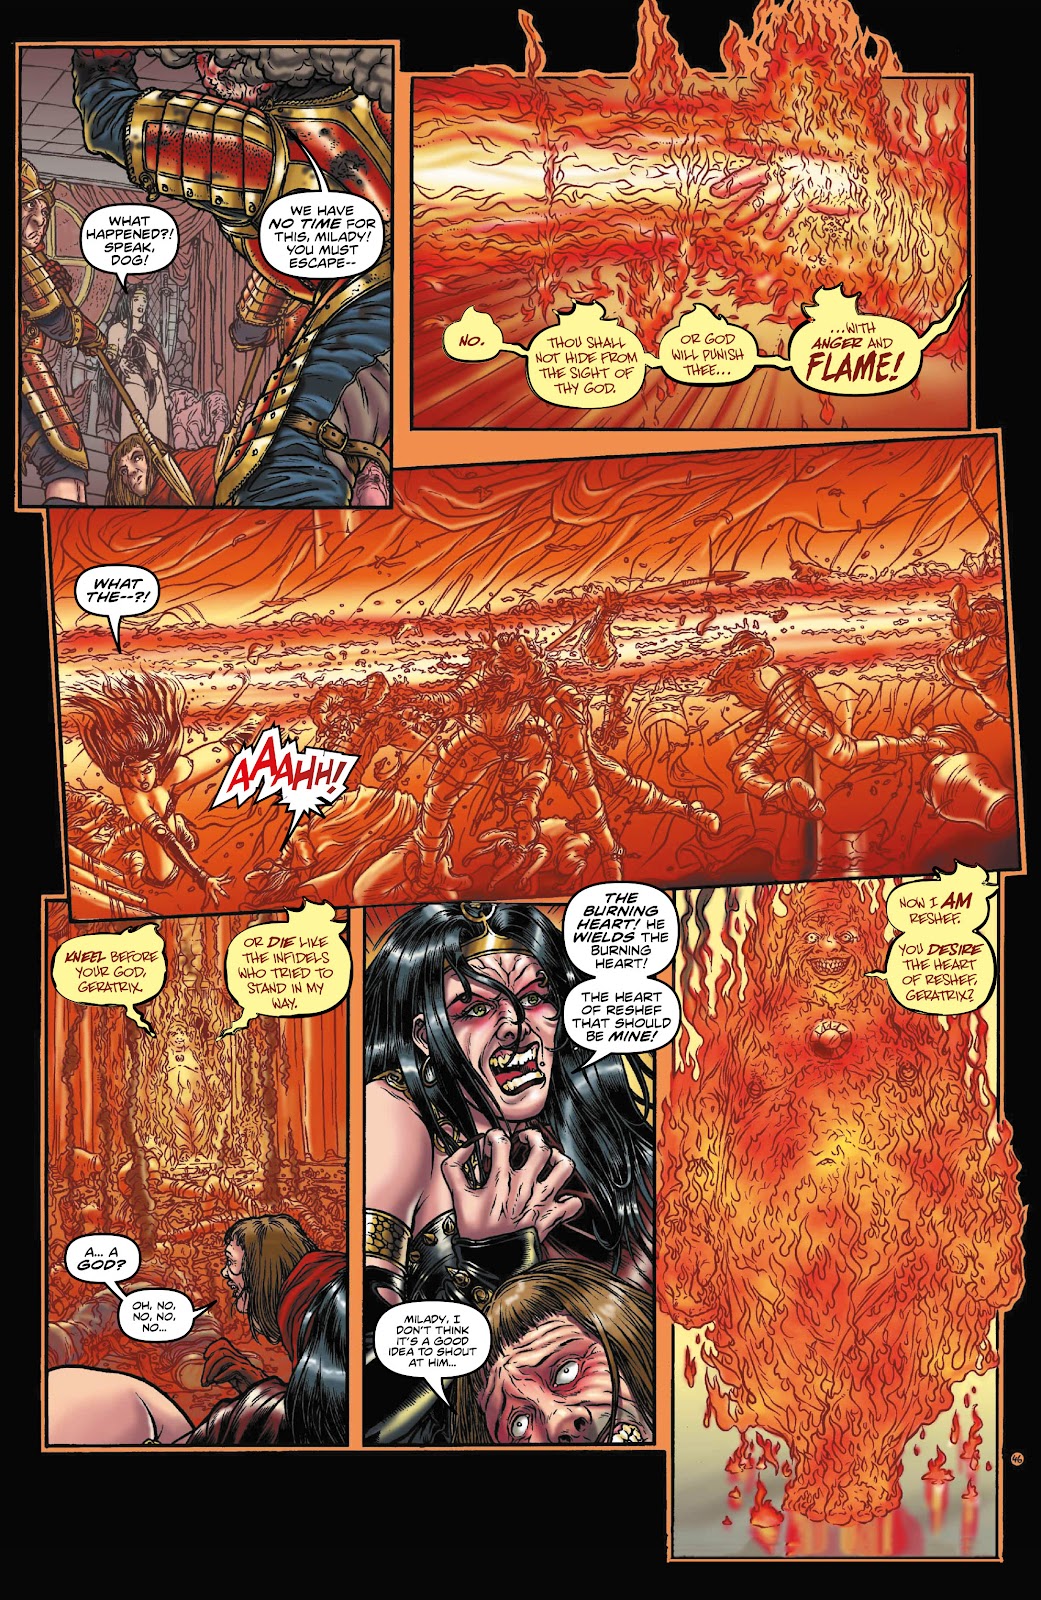 Rogues!: The Burning Heart issue 3 - Page 4